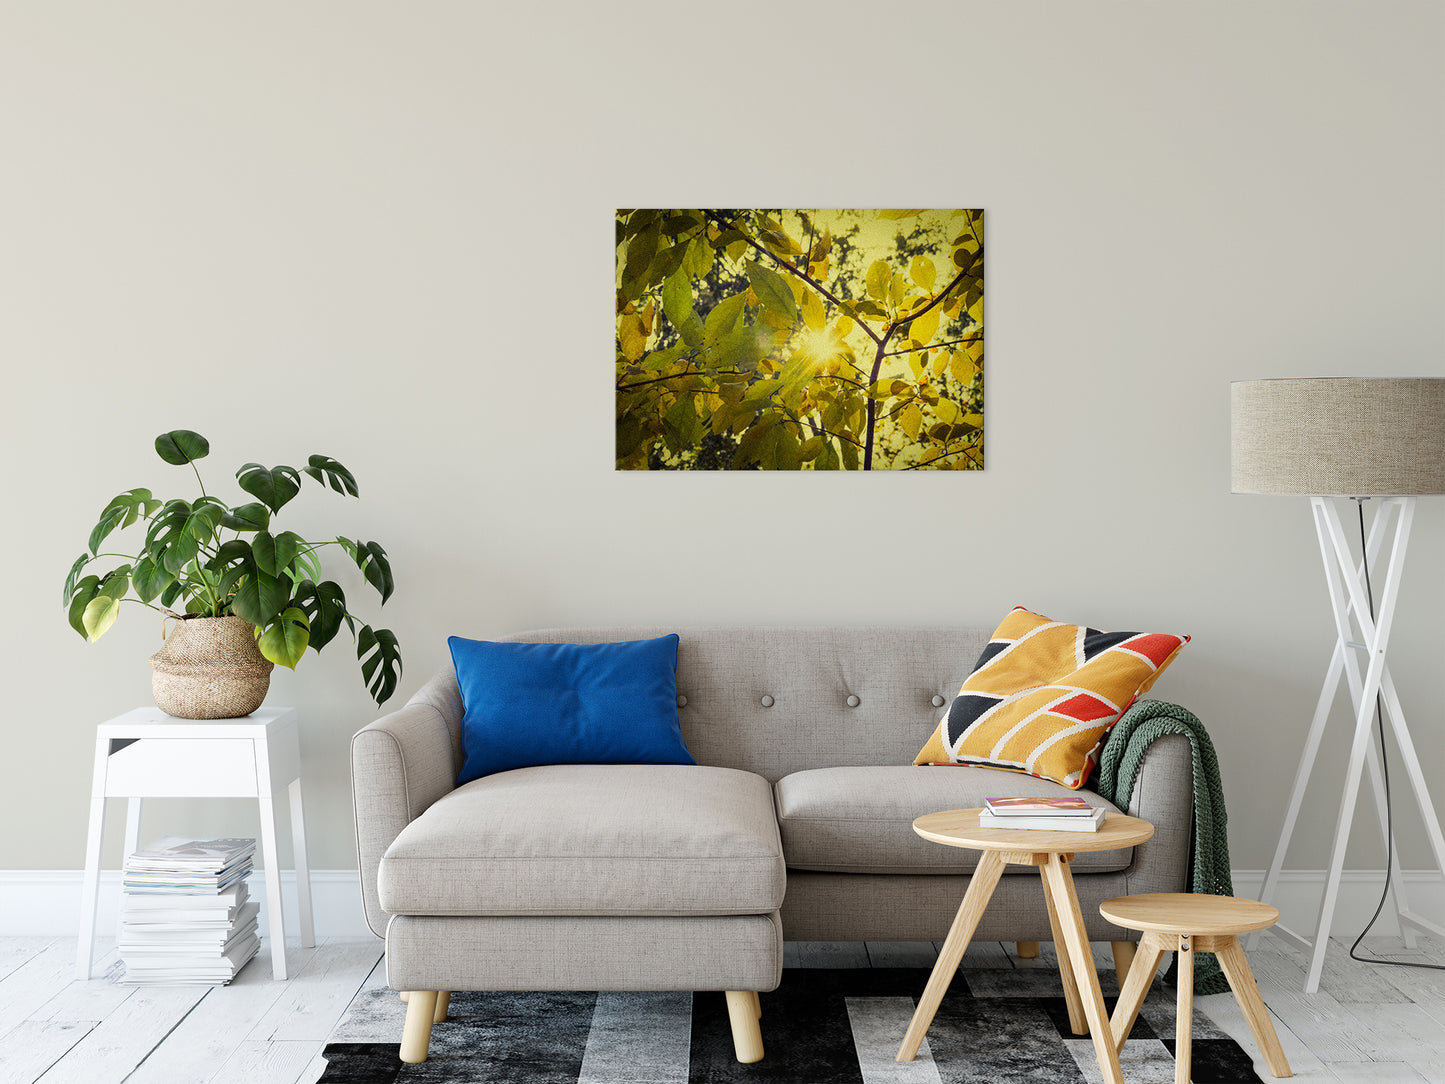 Plant Canvas Print: Aged Golden Leaves Botanical / Nature Photo Fine Art Canvas Wall Art Prints 24" x 36" - PIPAFINEART